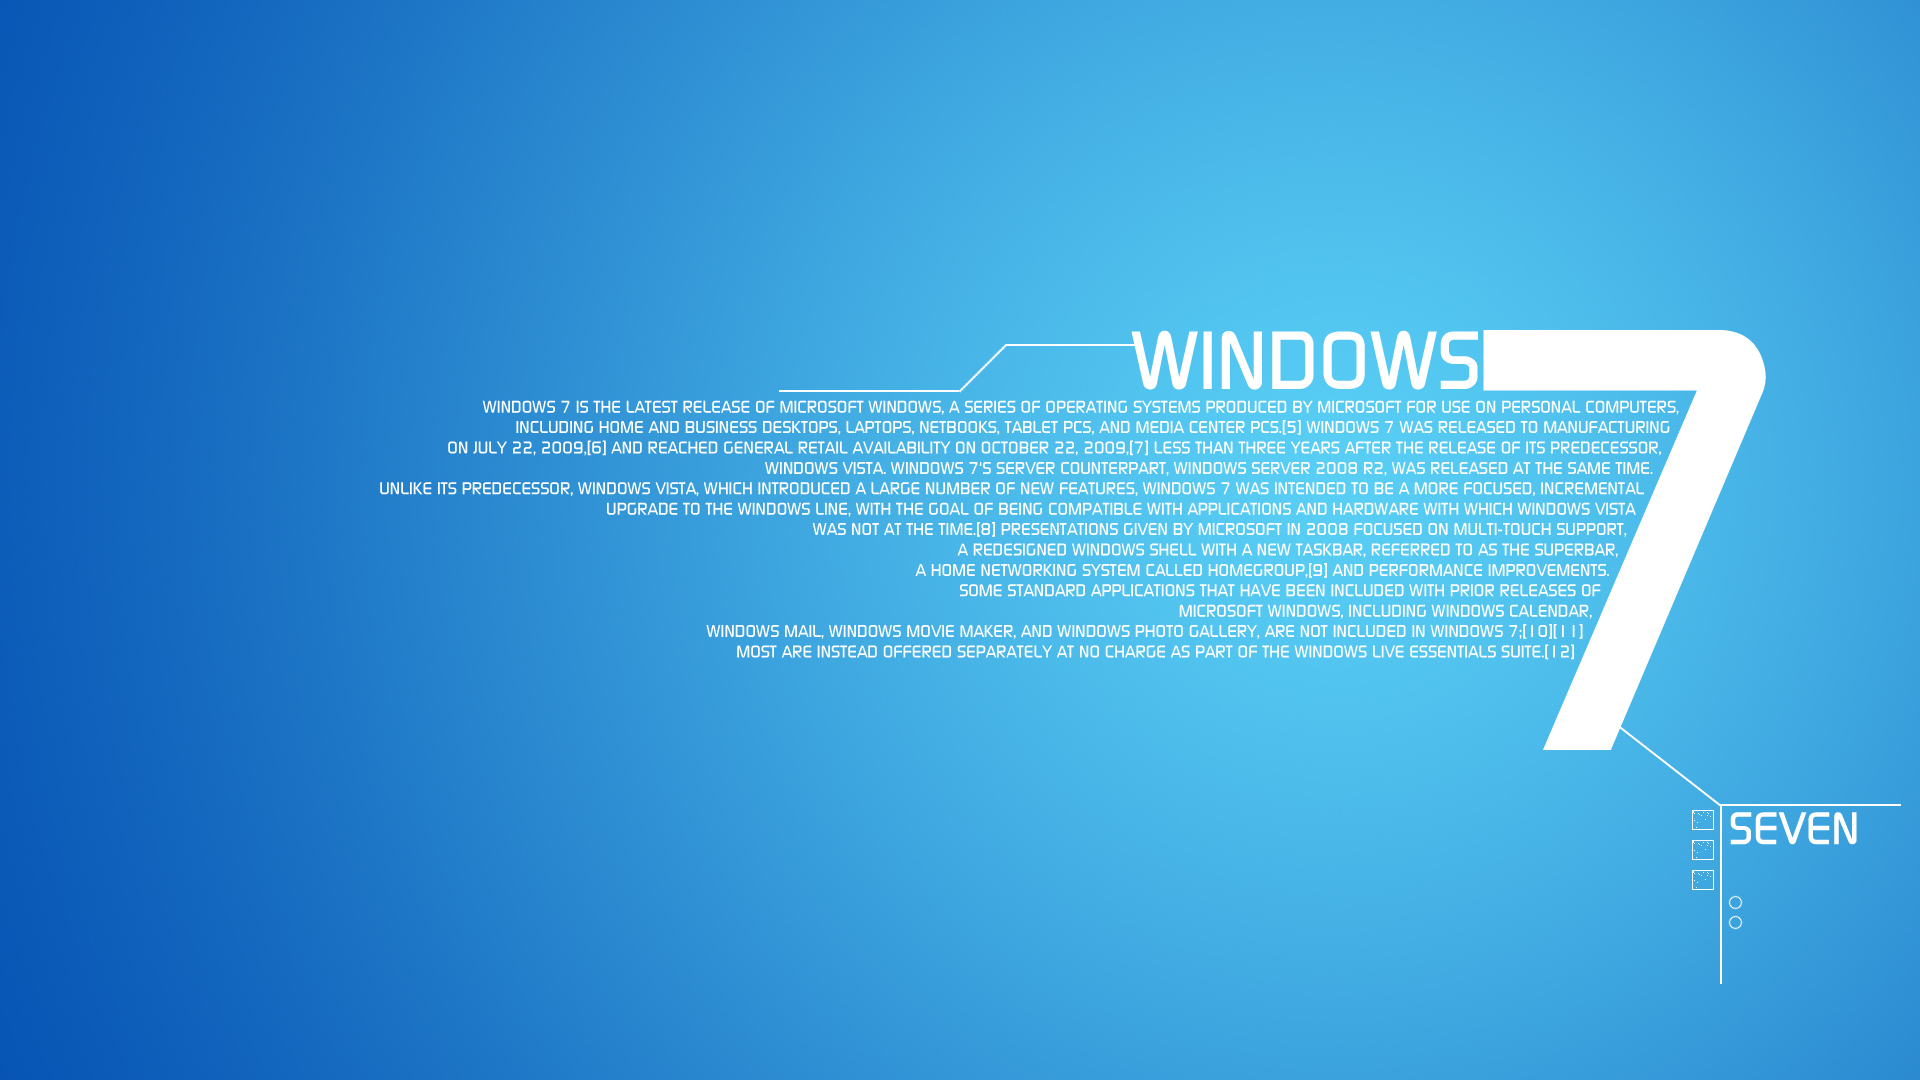 37 High Definition Windows 7 Wallpapers/Backgrounds For ...